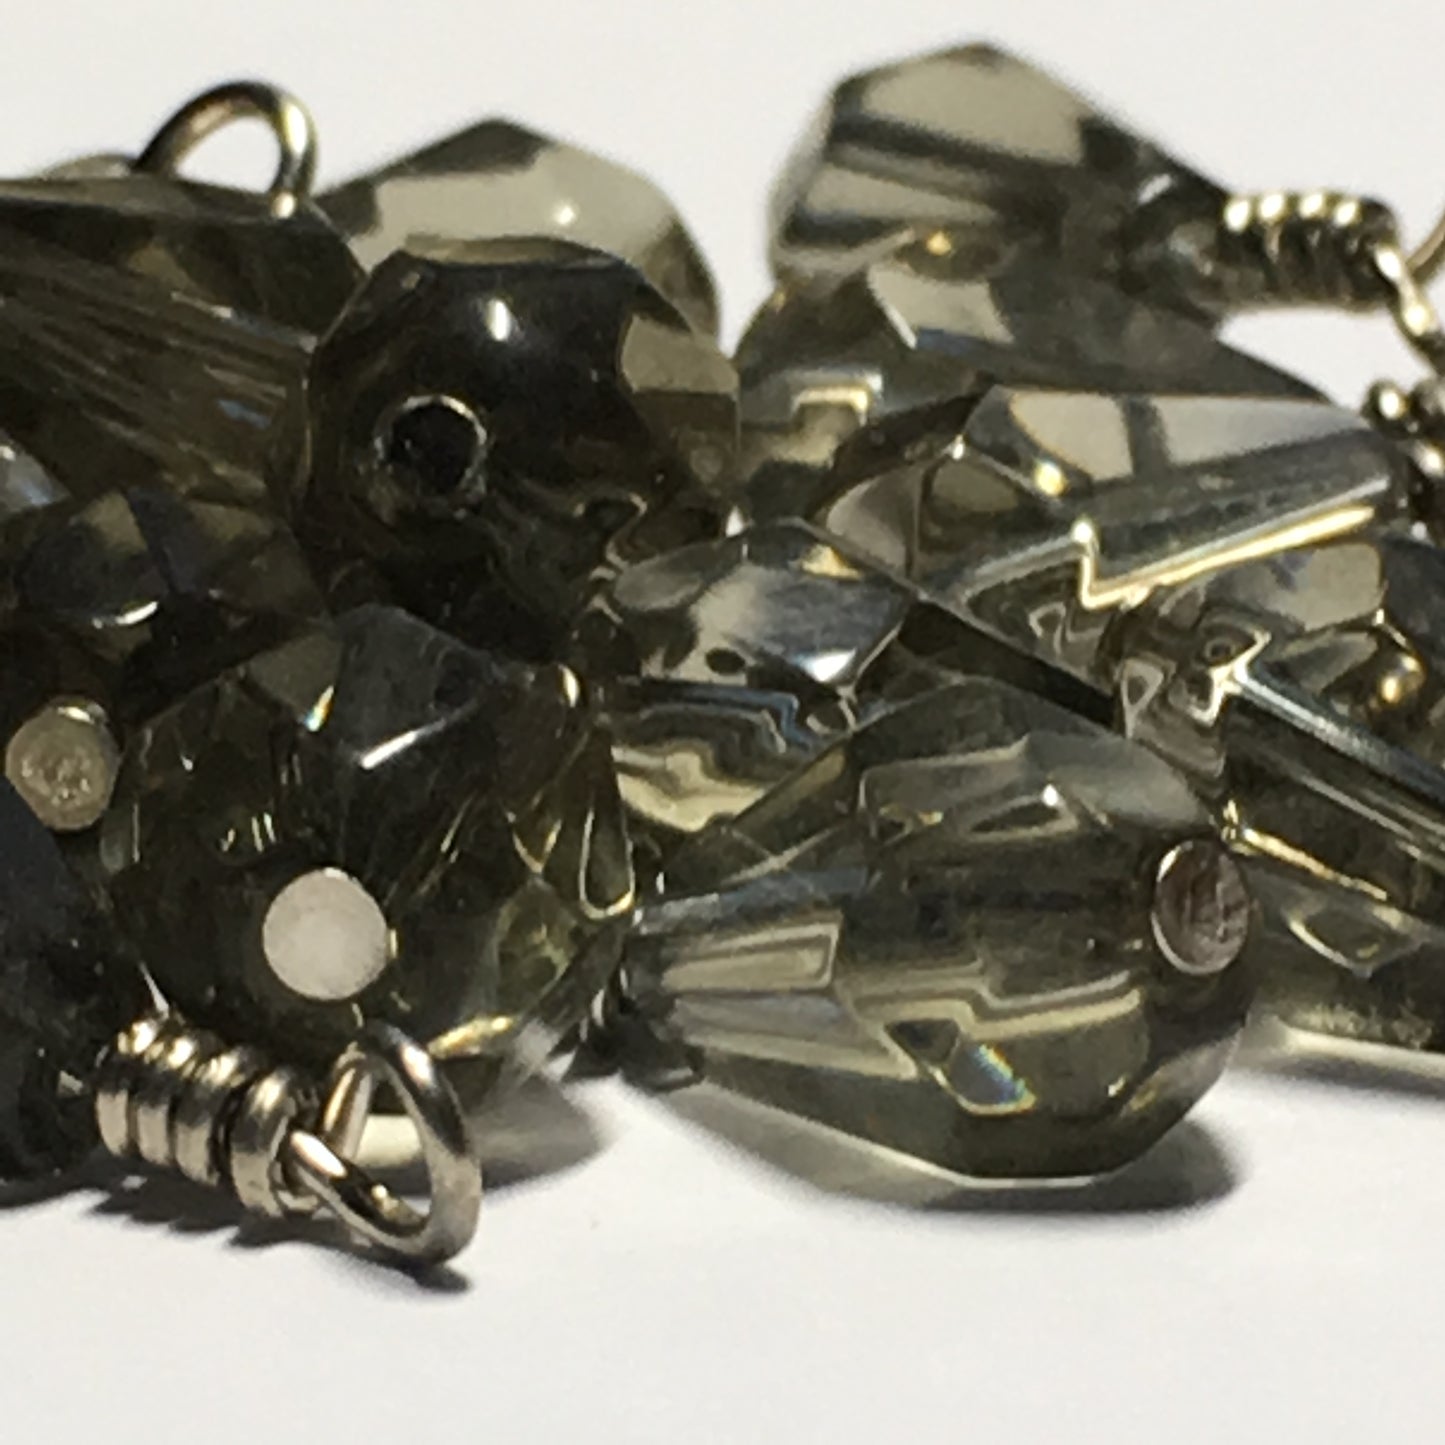 Transparent Gray Briolette Glass Beads, 20 x 11 mm, With Wire Wrapped Head Pins, 22 Beads